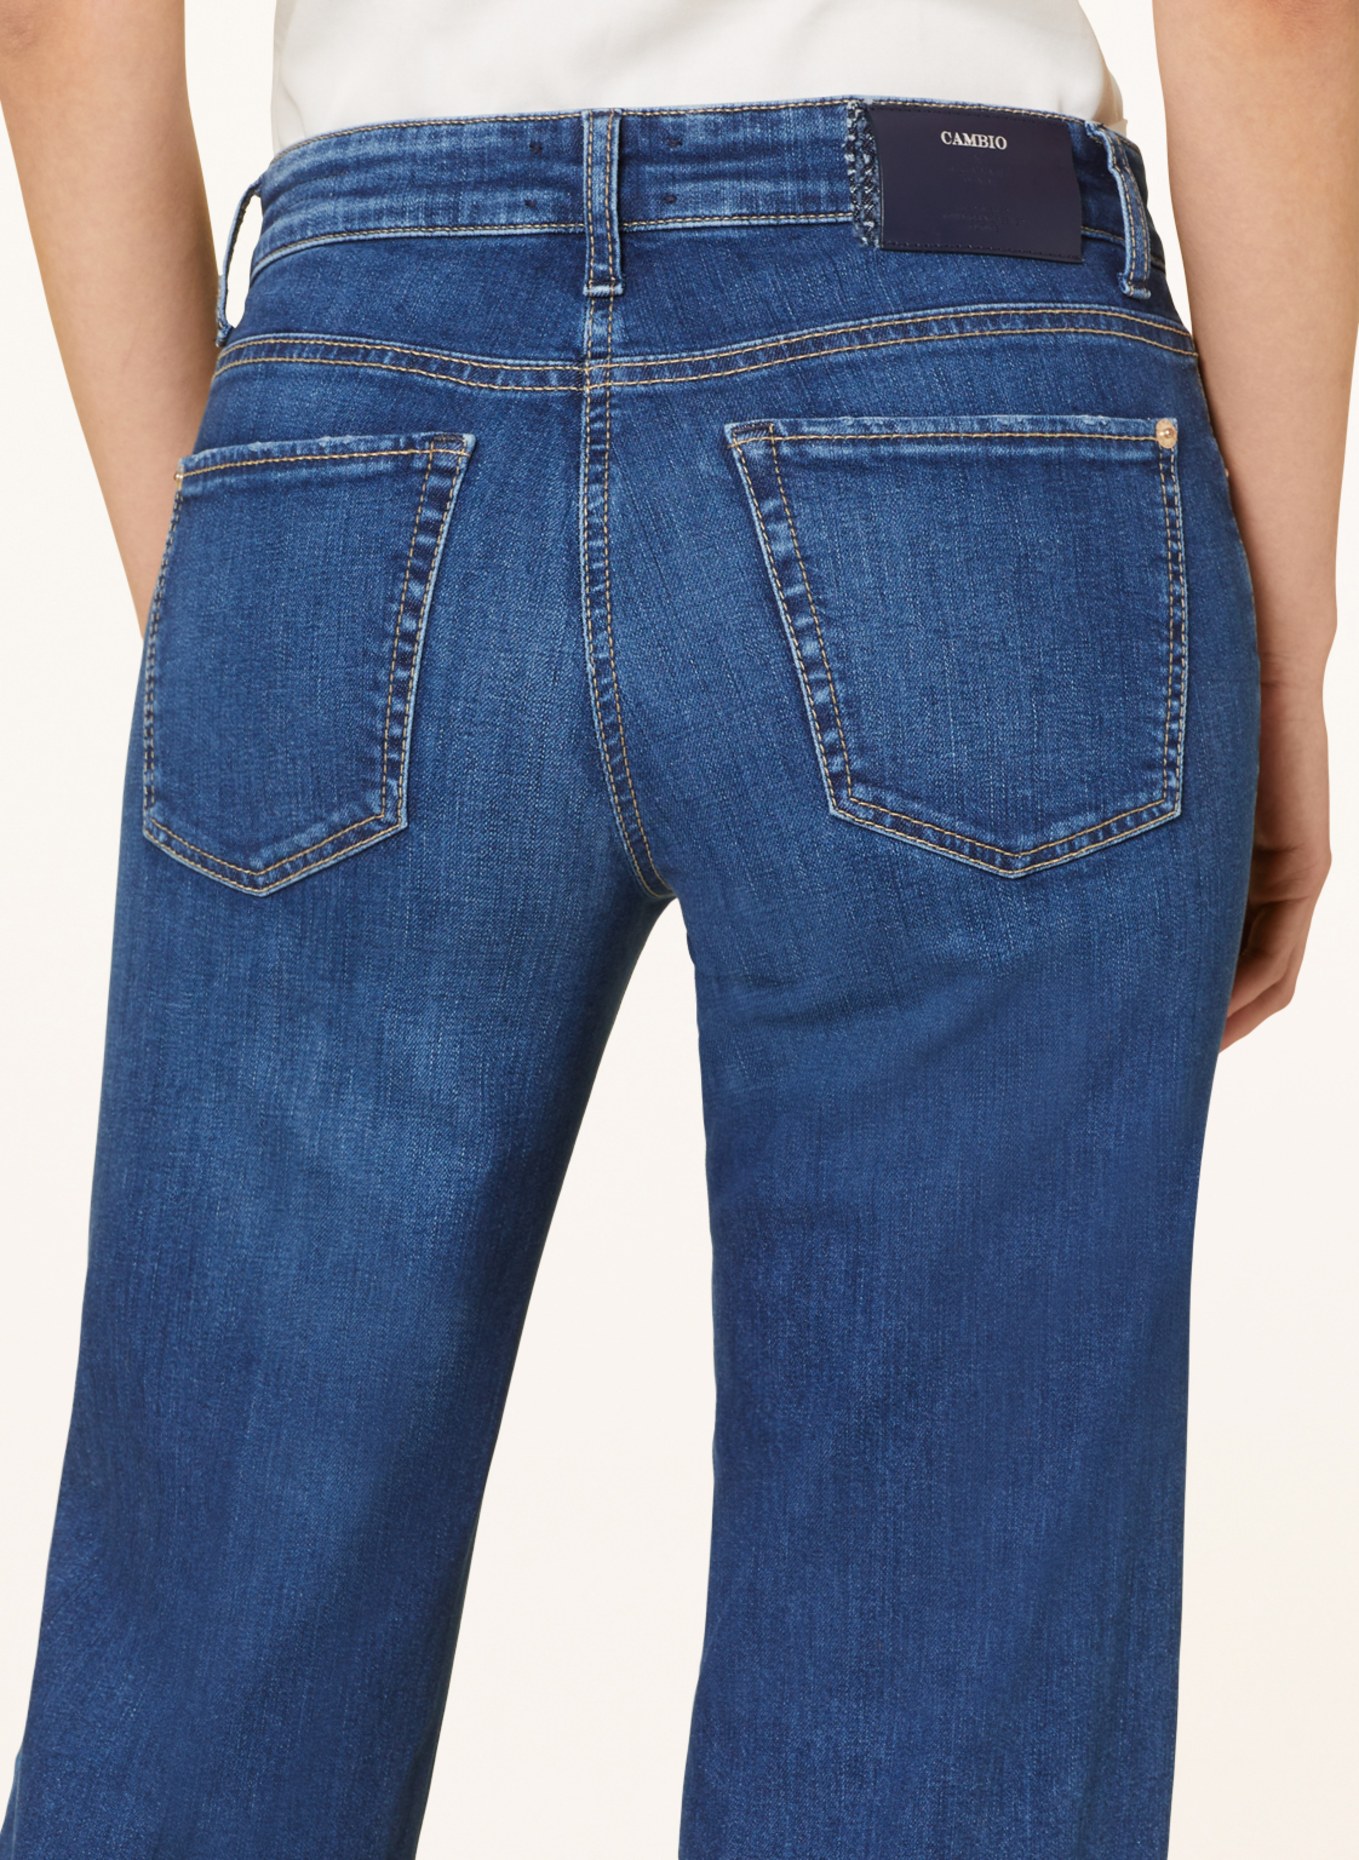 CAMBIO Flared jeans TESS, Color: 5187 eco used (Image 6)